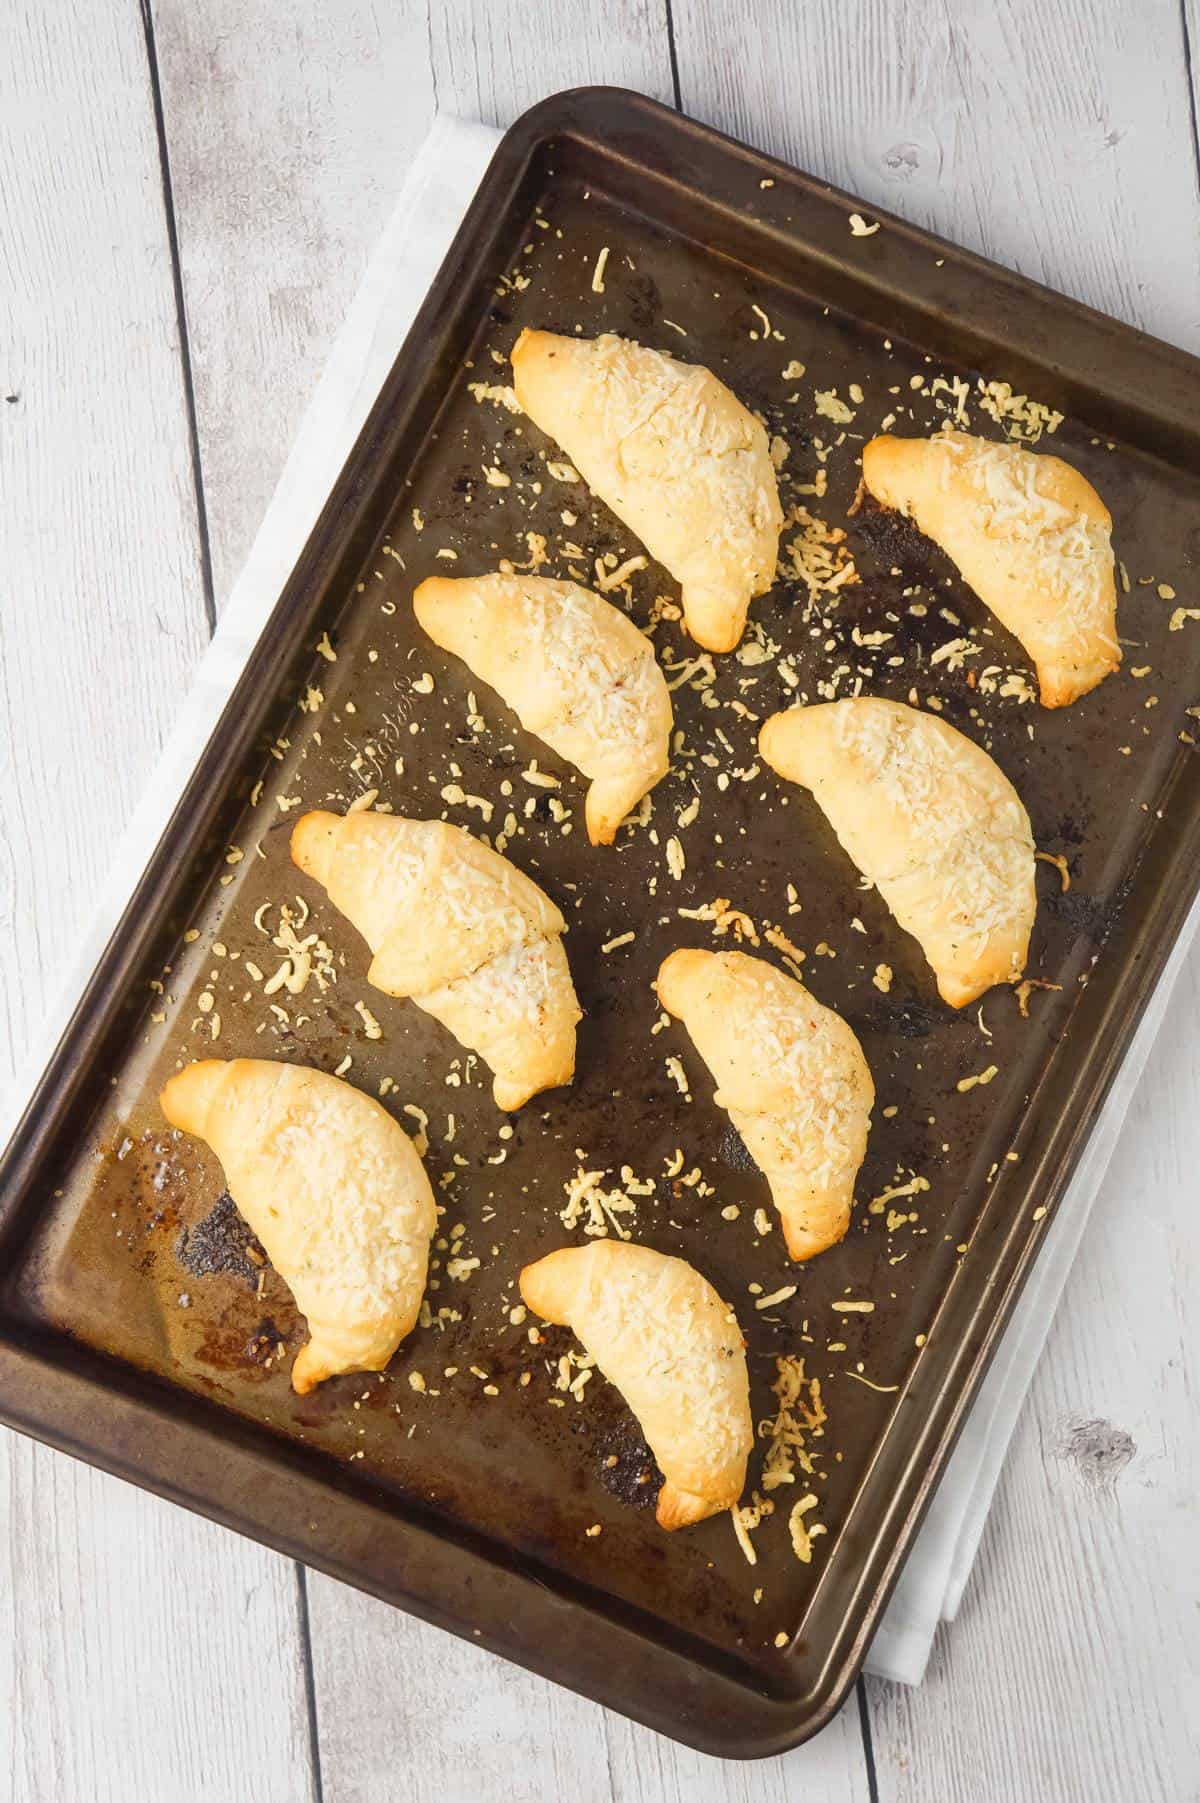 Garlic Parmesan Crescent Rolls are a simple and delicious recipe using Pillsbury crescent rolls, homemade garlic butter and shredded Parmesan cheese.